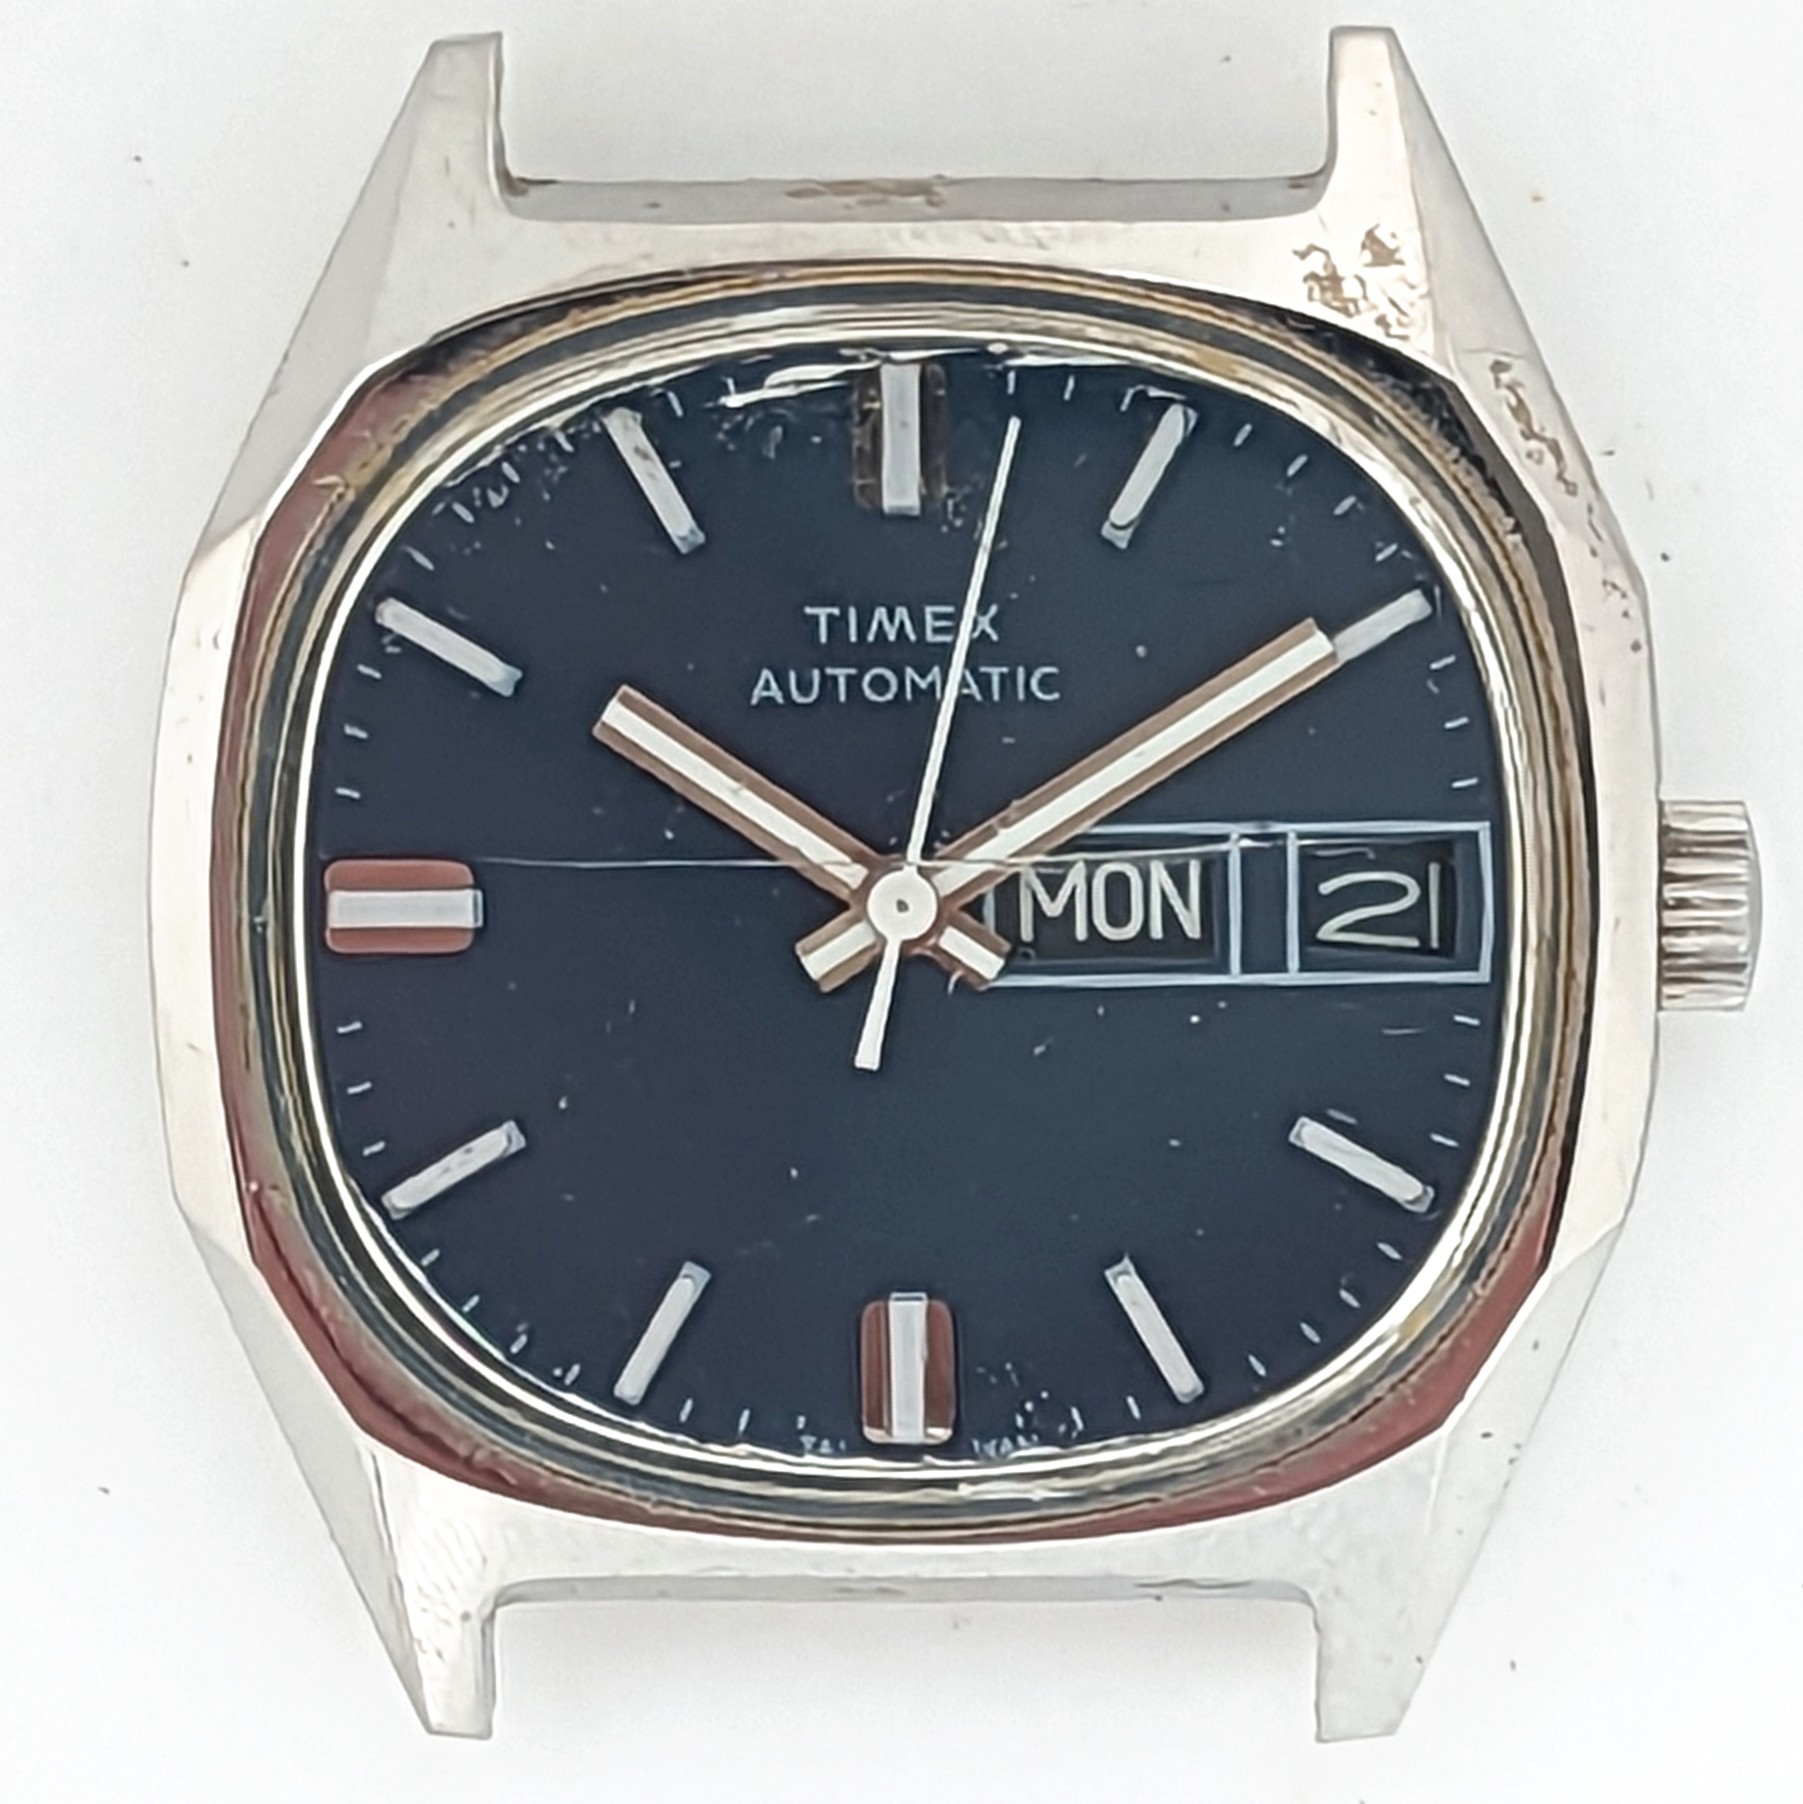 Timex Automatic 35111 10981 [1981]